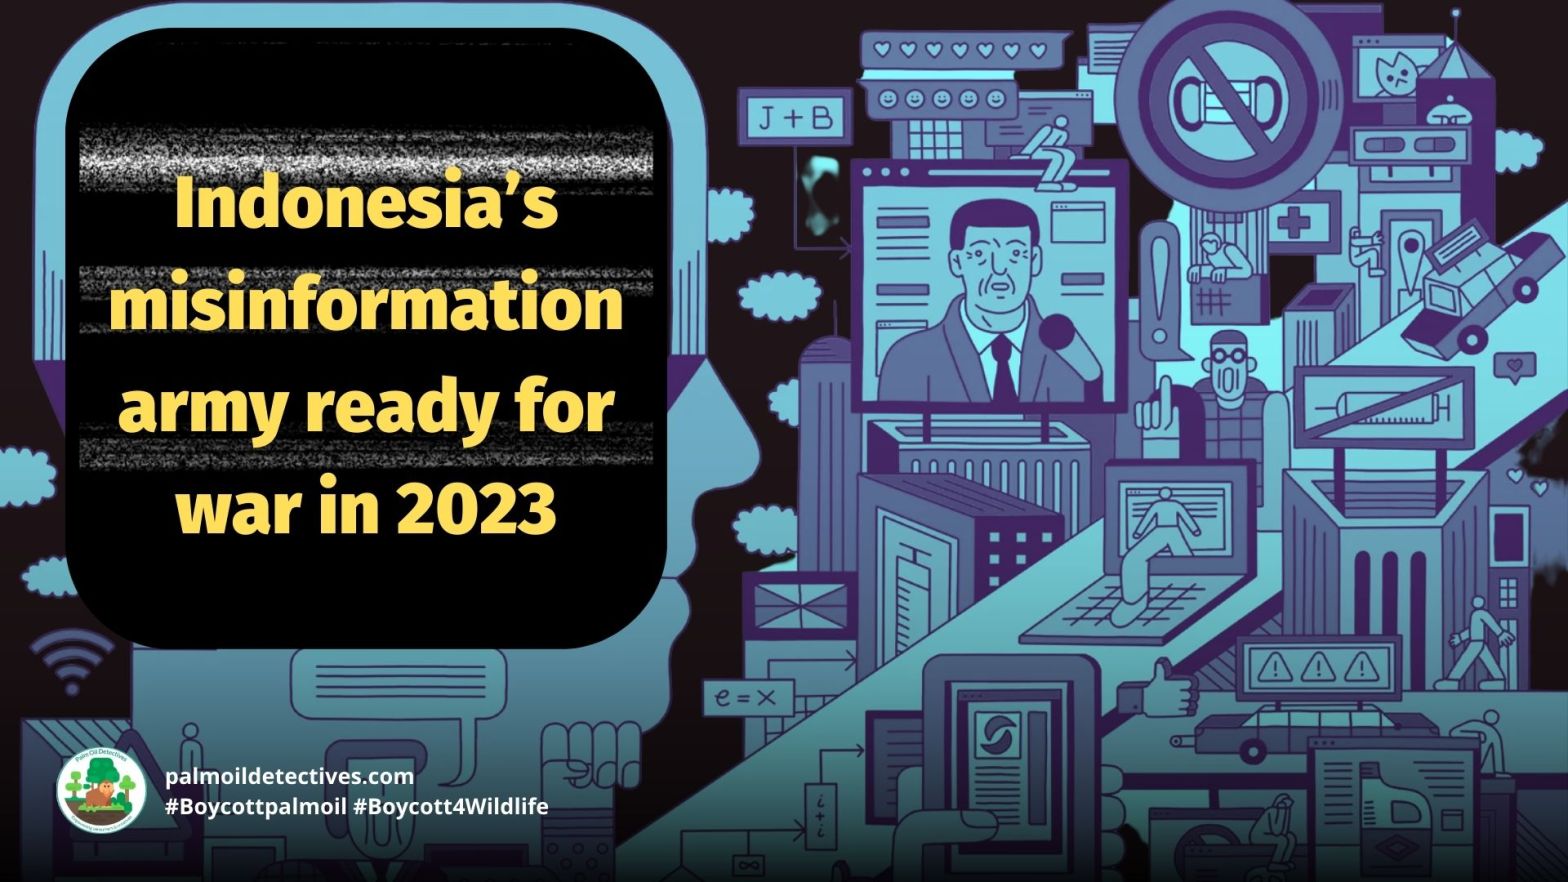 Indonesia misinformation army is ready for war in 2023